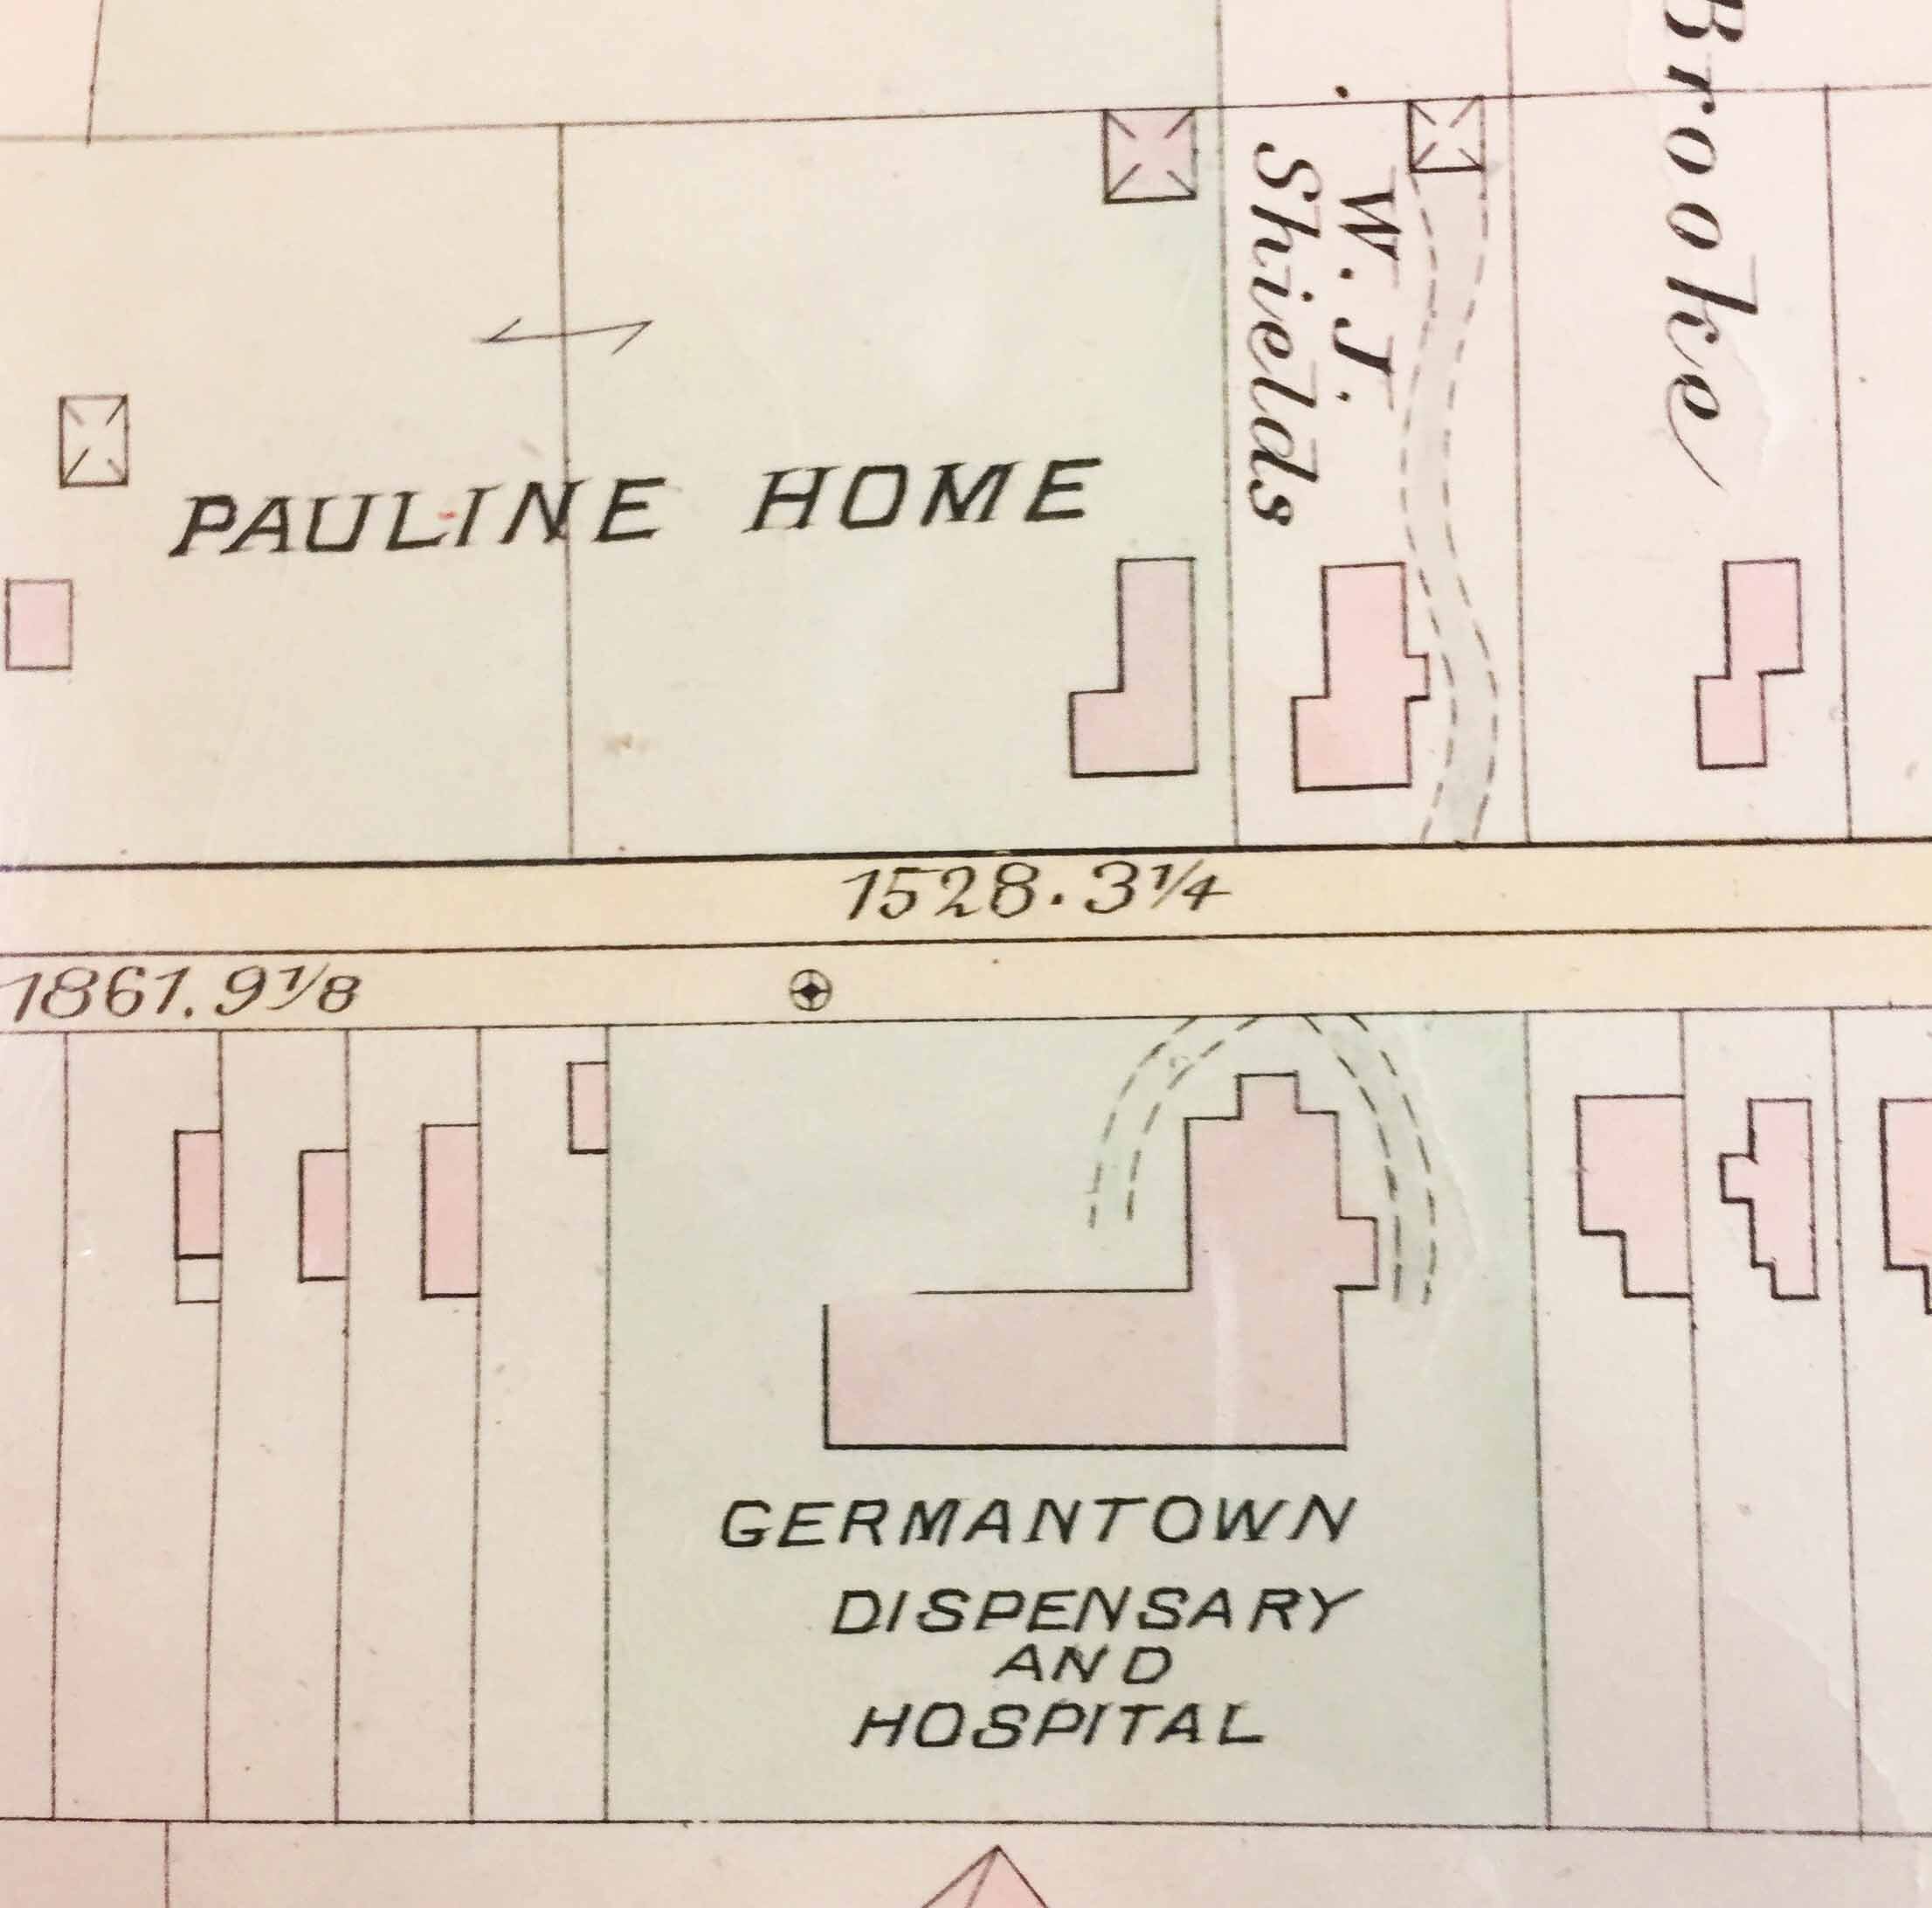  Figure 18: Map showing the location of the Pauline Temporary Home across from the Germantown Hospital. (GHS) 